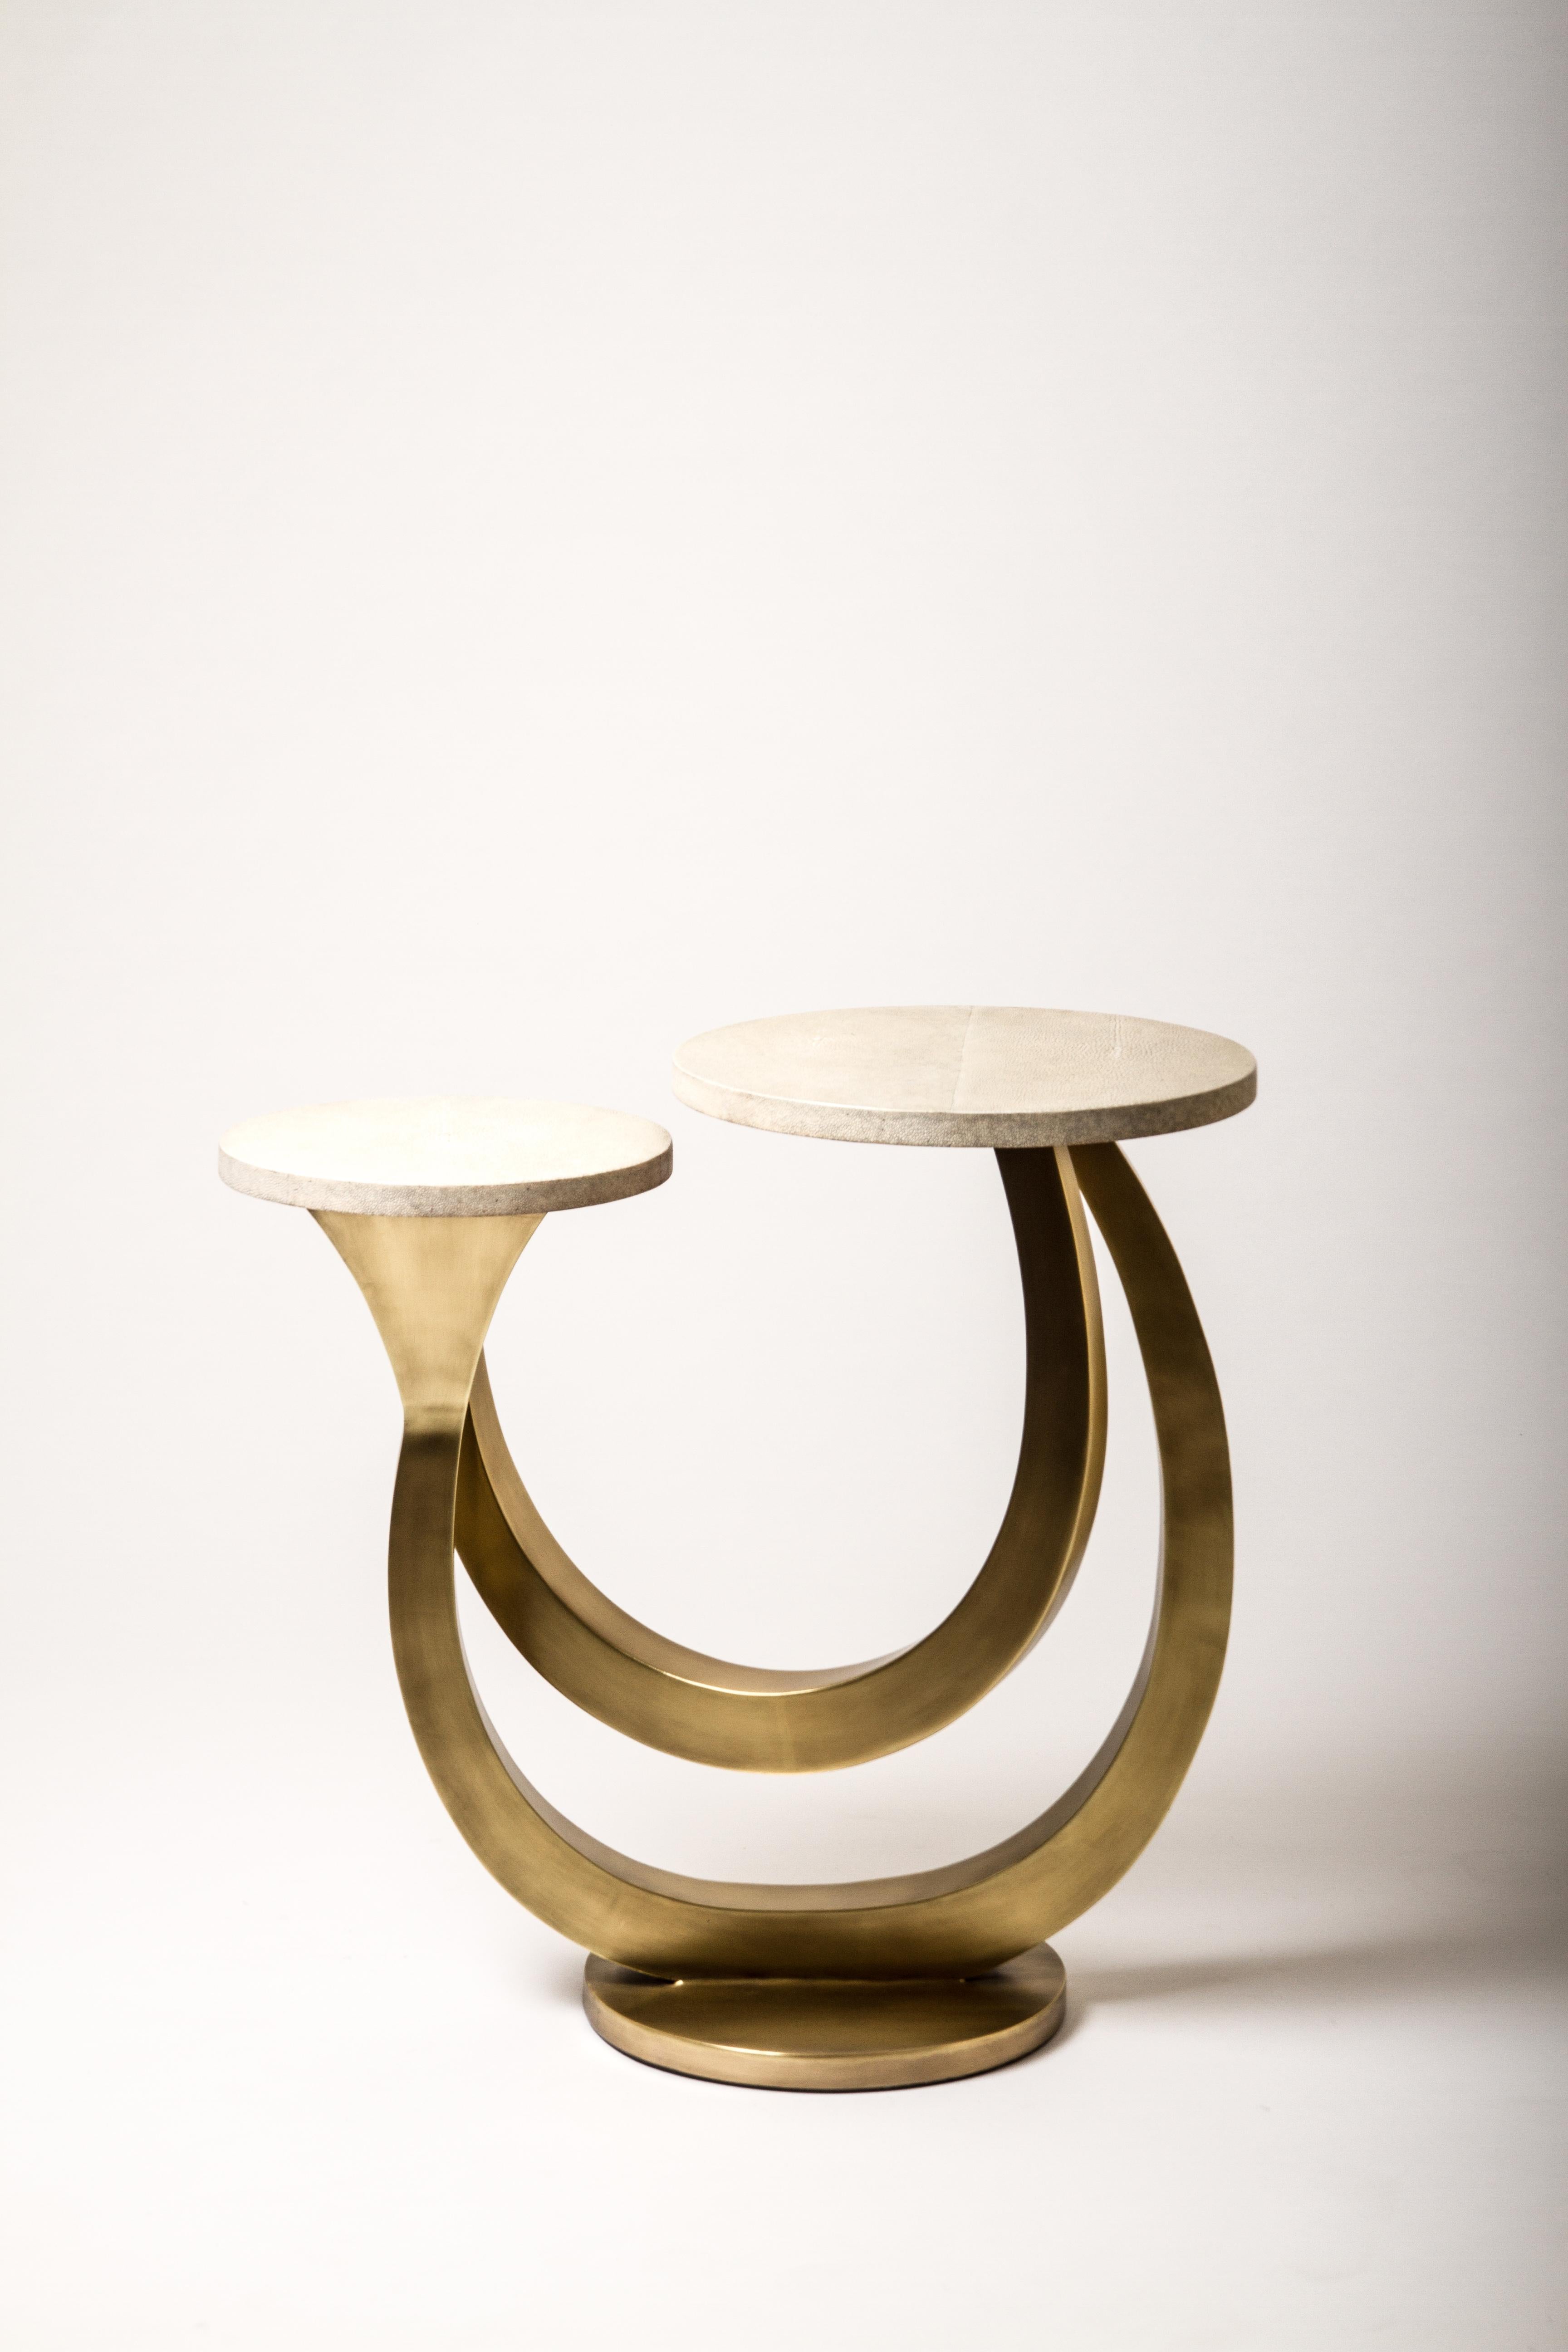 The Luna Side Table in cream shagreen is inspired by cosmic formations. The piece has two shagreen tops that rest at different levels, followed by bold bronze. A statement end table for any living space. The shagreen is hand-dyed by artisans and the